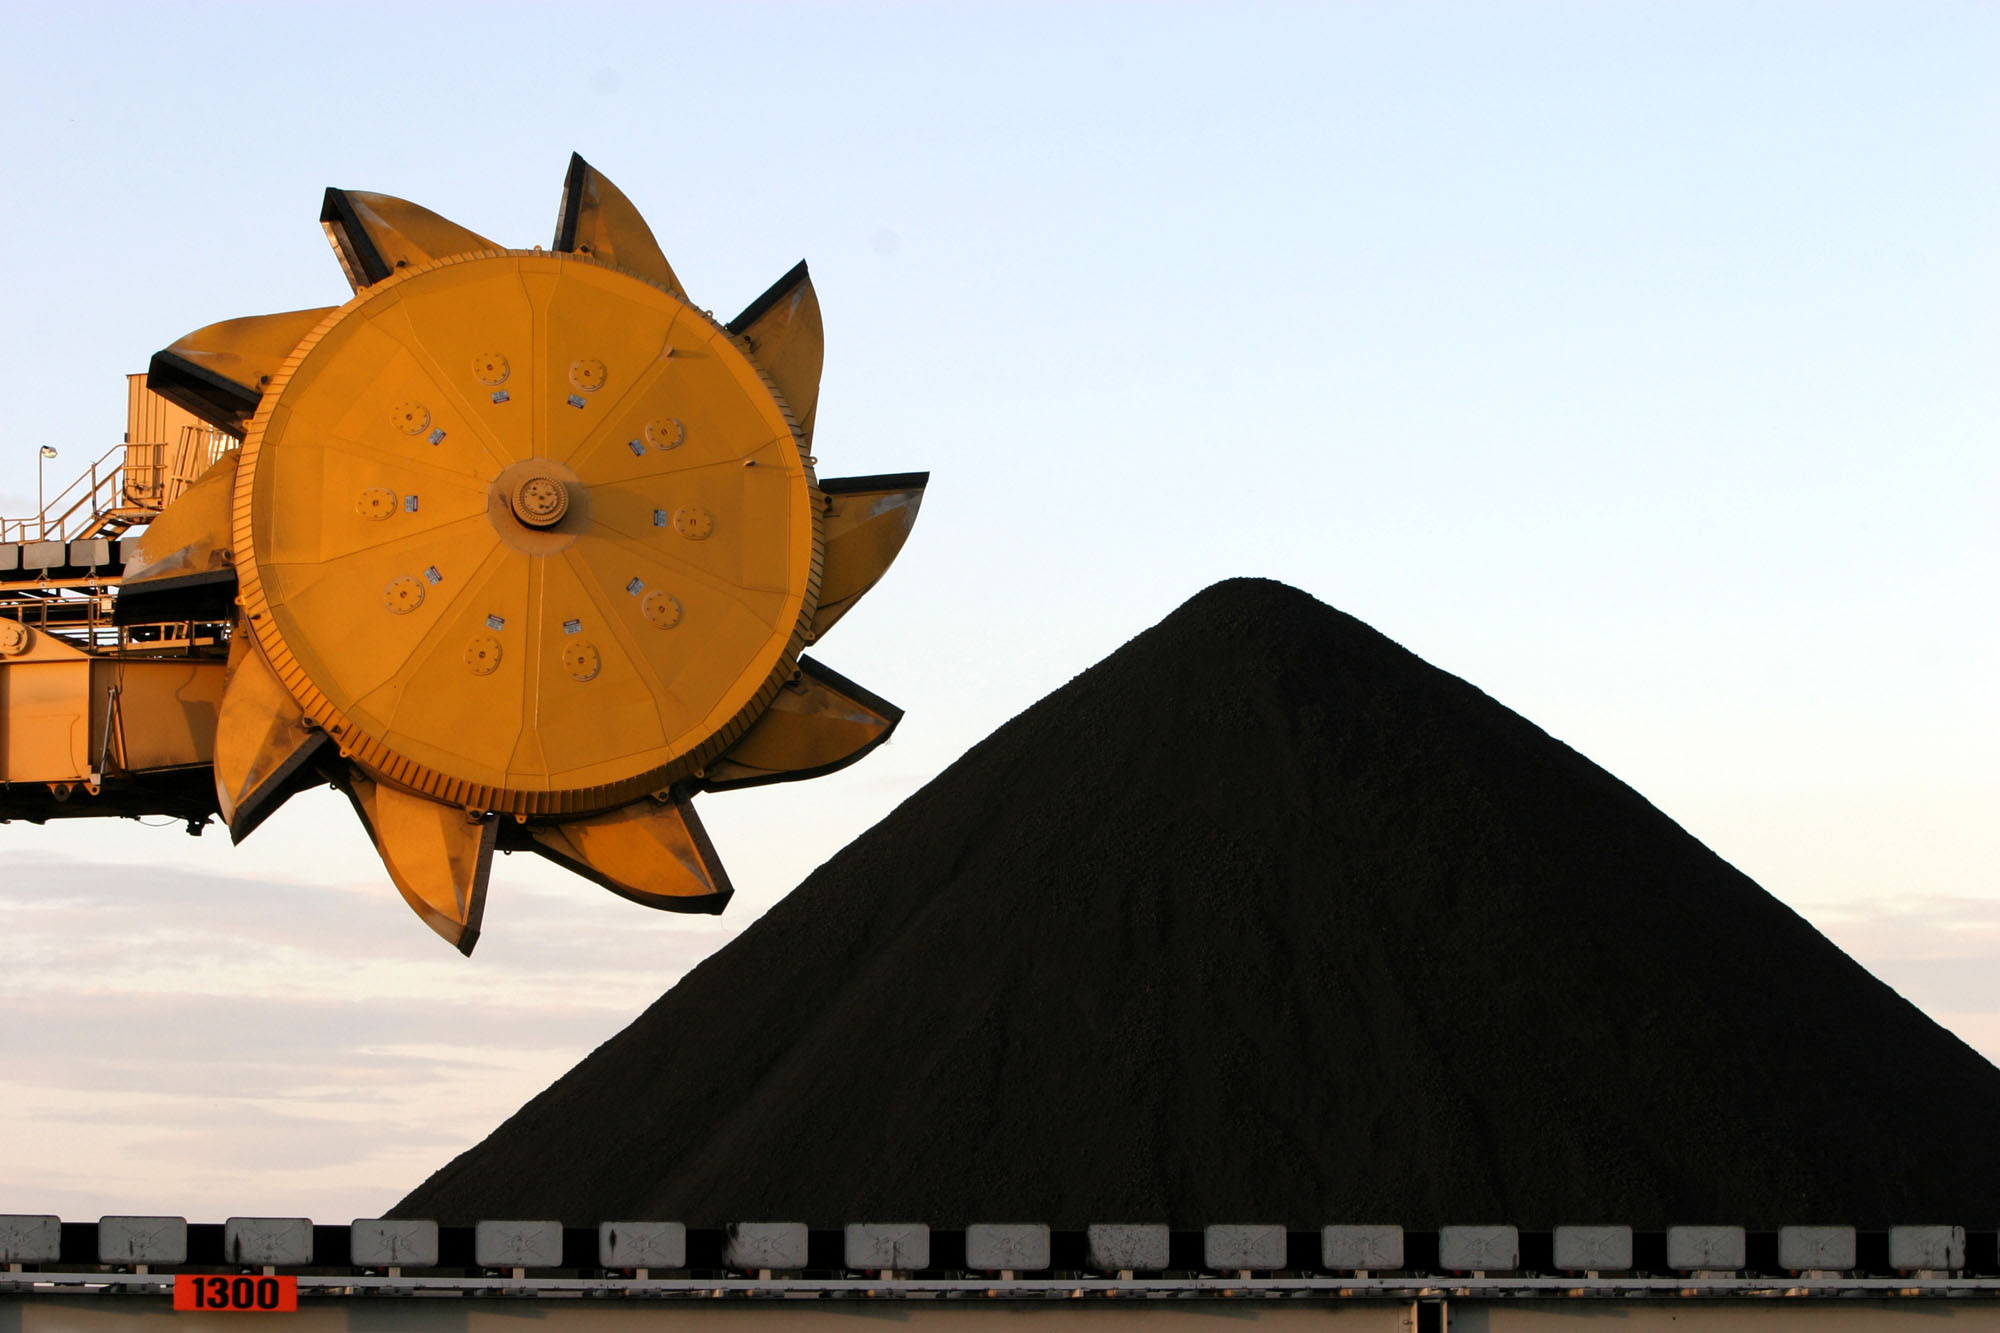 A bucketwheel coal reclaimer stands ready near  a pile of coal at the port in Newcastle on April 1, 2004.